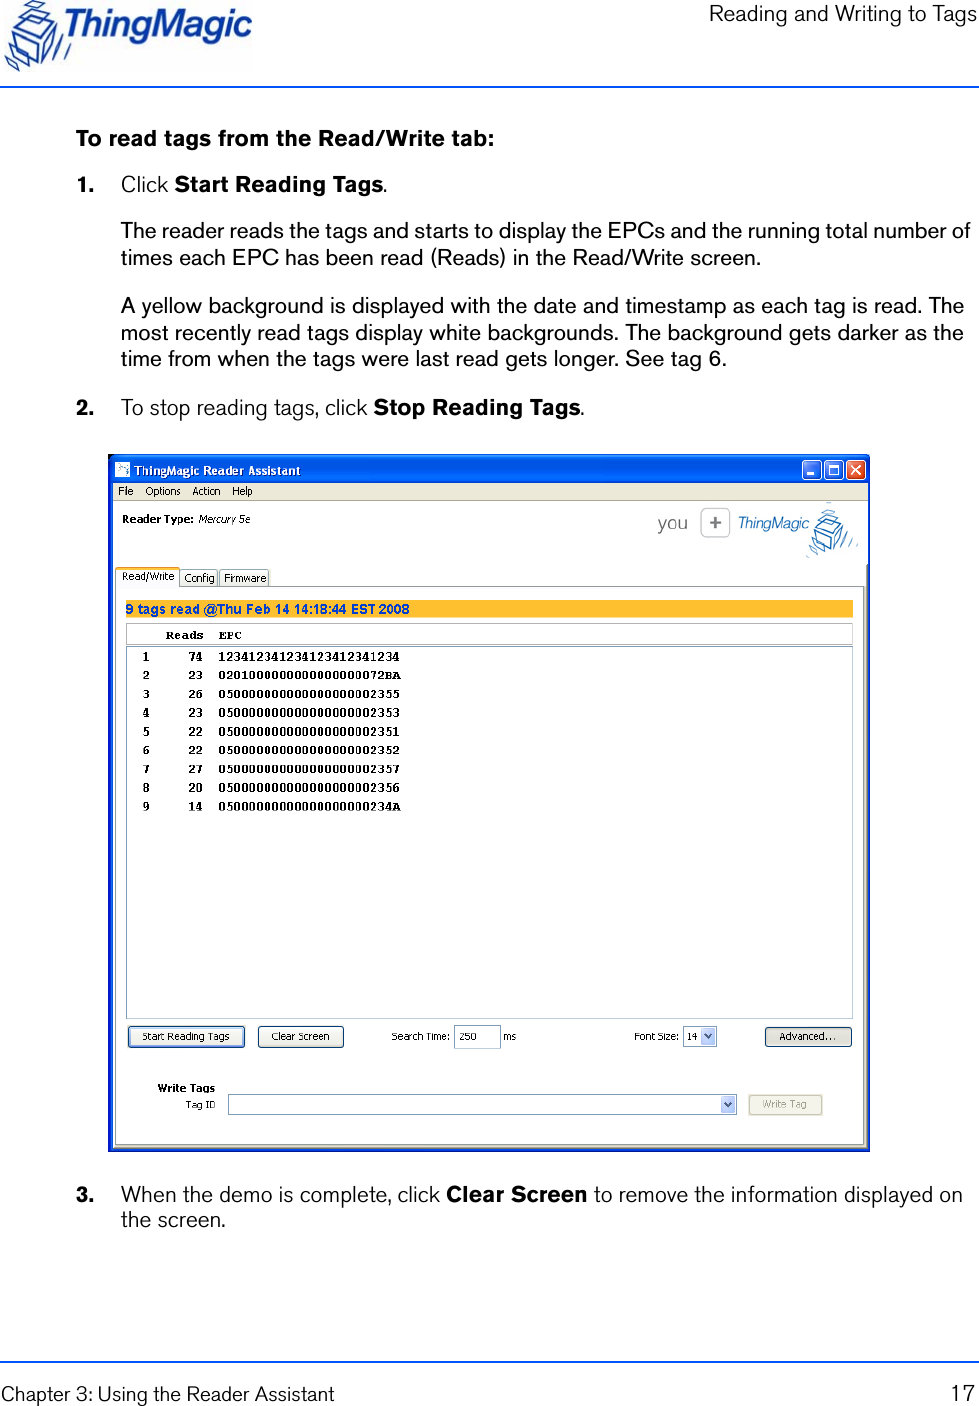 Reading and Writing to TagsChapter 3: Using the Reader Assistant 17To read tags from the Read/Write tab:1.    Click Start Reading Tags.The reader reads the tags and starts to display the EPCs and the running total number of times each EPC has been read (Reads) in the Read/Write screen.A yellow background is displayed with the date and timestamp as each tag is read. The most recently read tags display white backgrounds. The background gets darker as the time from when the tags were last read gets longer. See tag 6.2.    To stop reading tags, click Stop Reading Tags.3.    When the demo is complete, click Clear Screen to remove the information displayed on the screen.